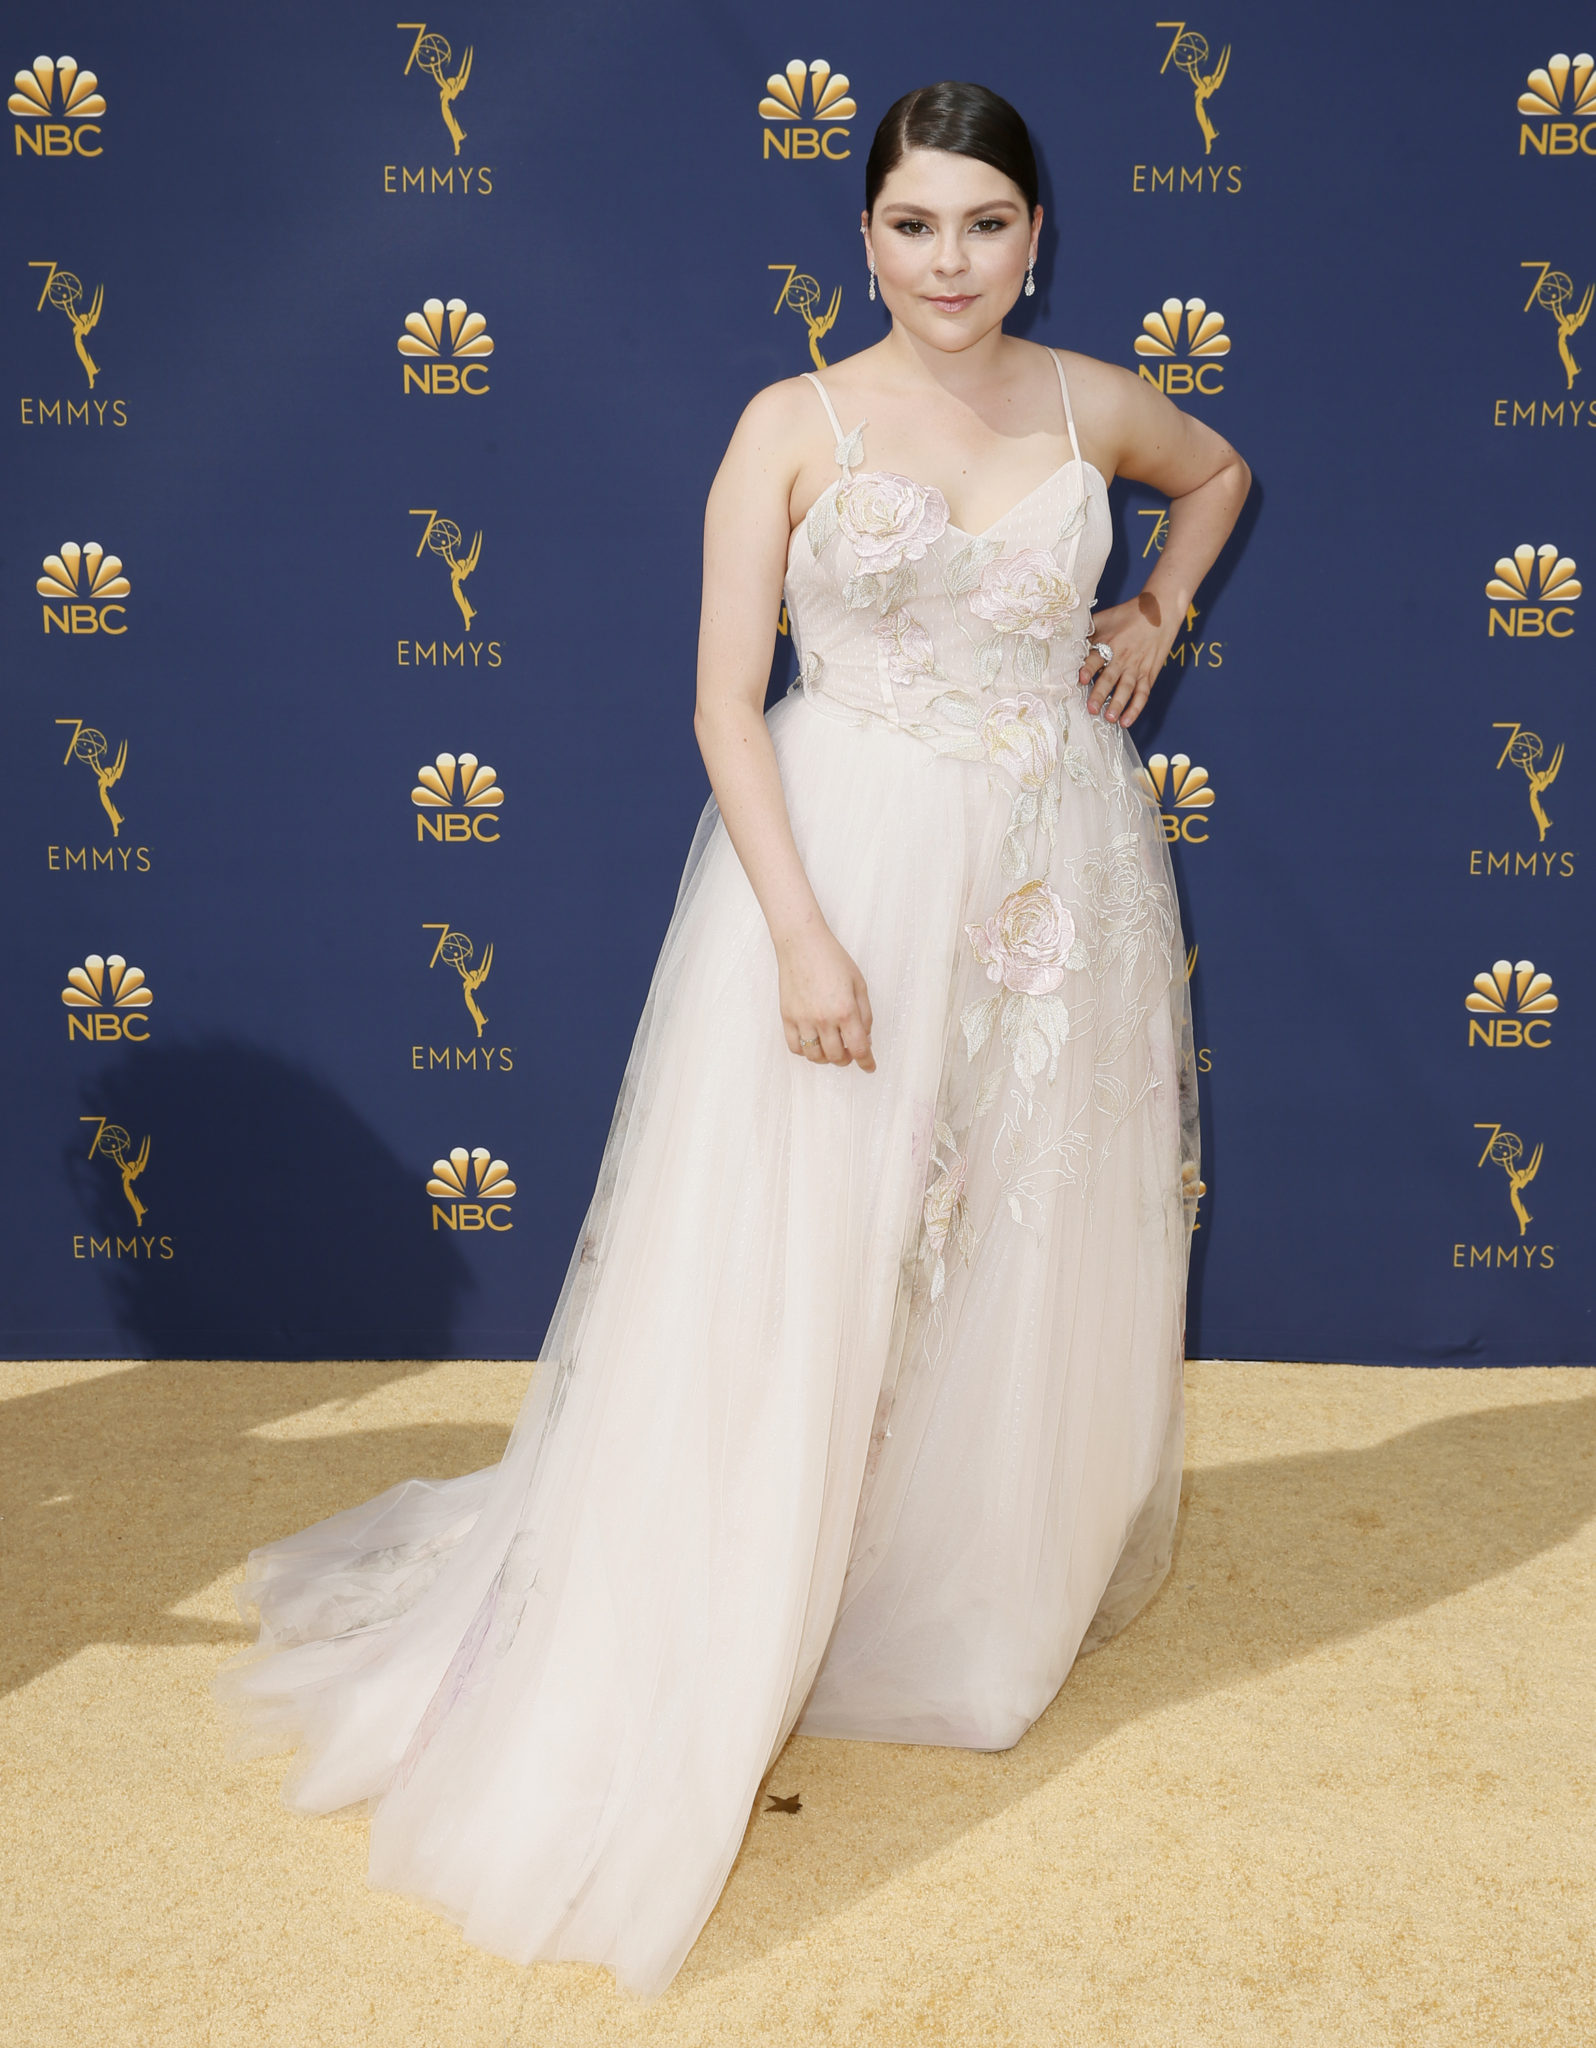 Hannah Zeile Emmys 4Chion Lifestyle